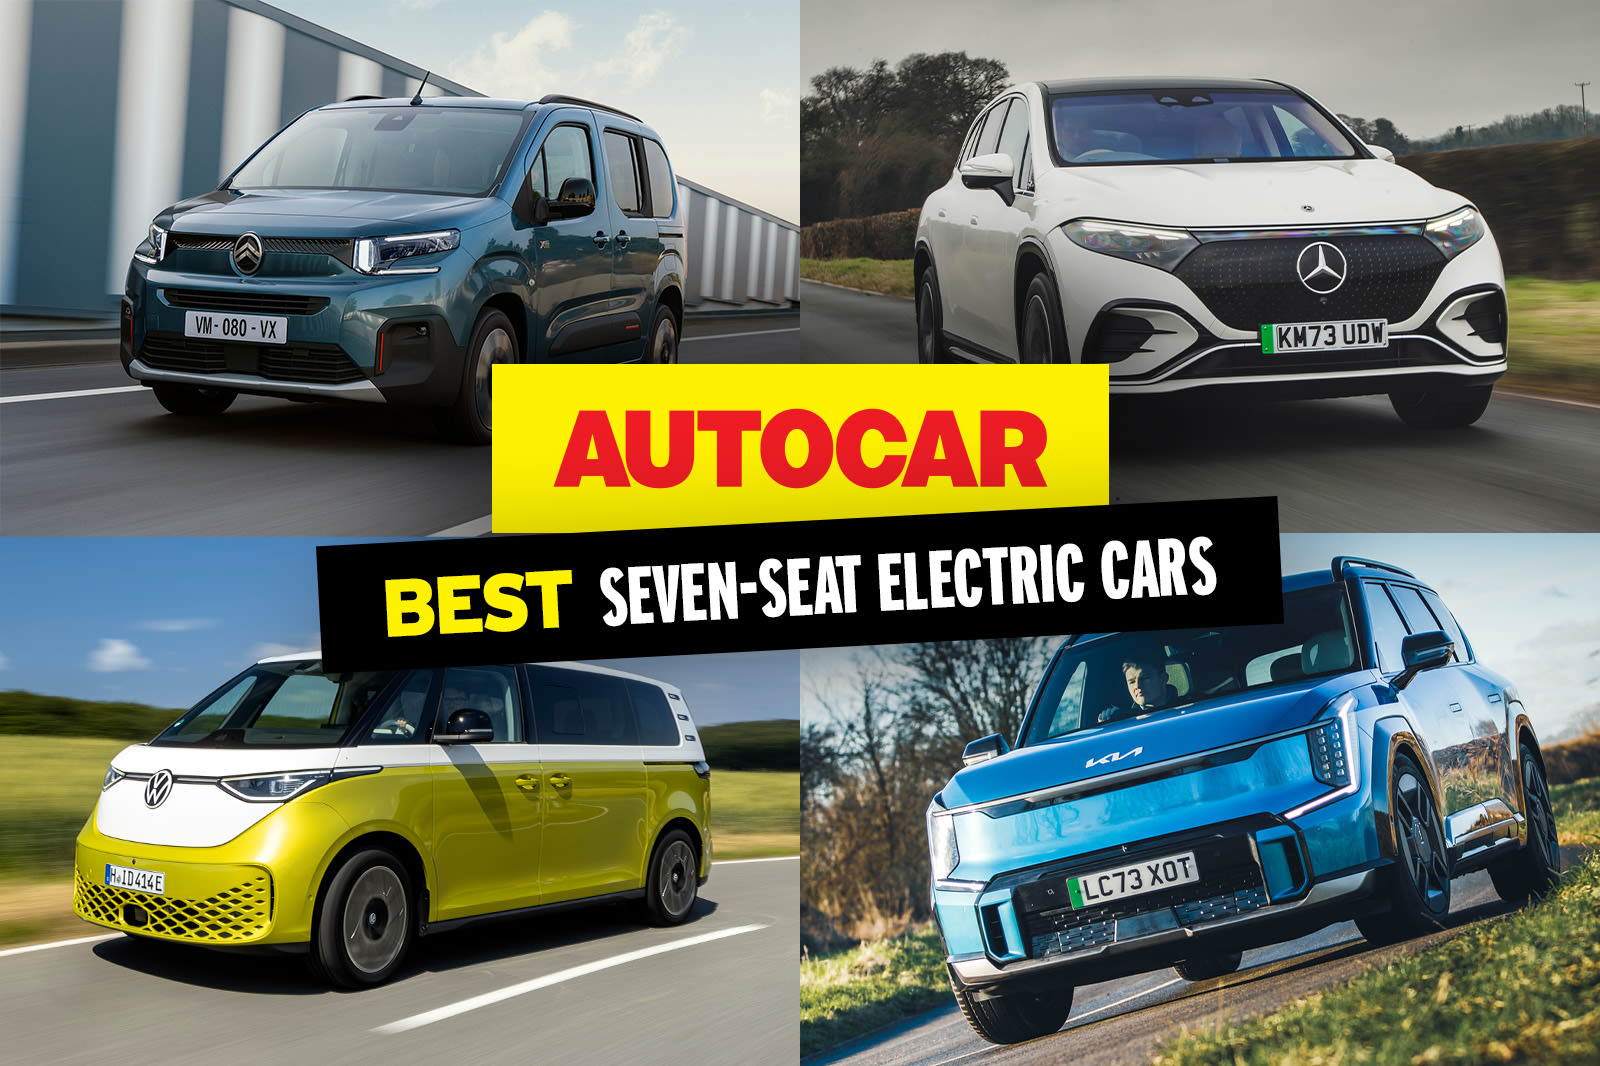 Top 10 best seven-seat electric cars